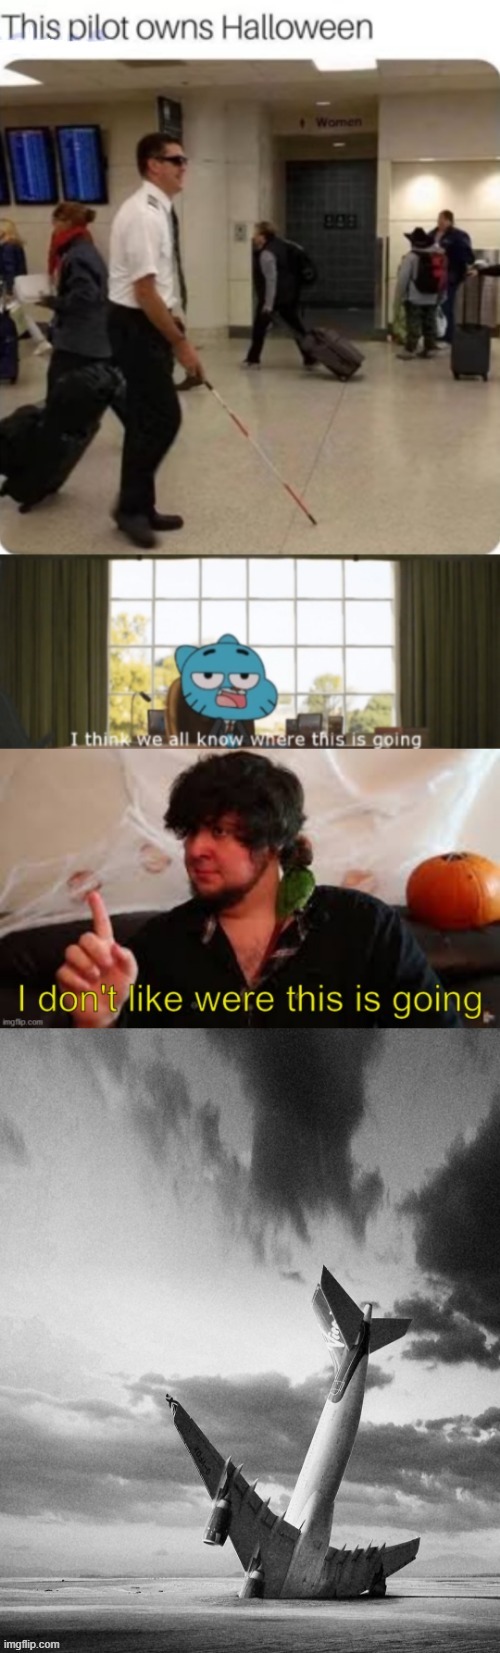 image tagged in i think we all know where this is going,jontron i don't like where this is going | made w/ Imgflip meme maker